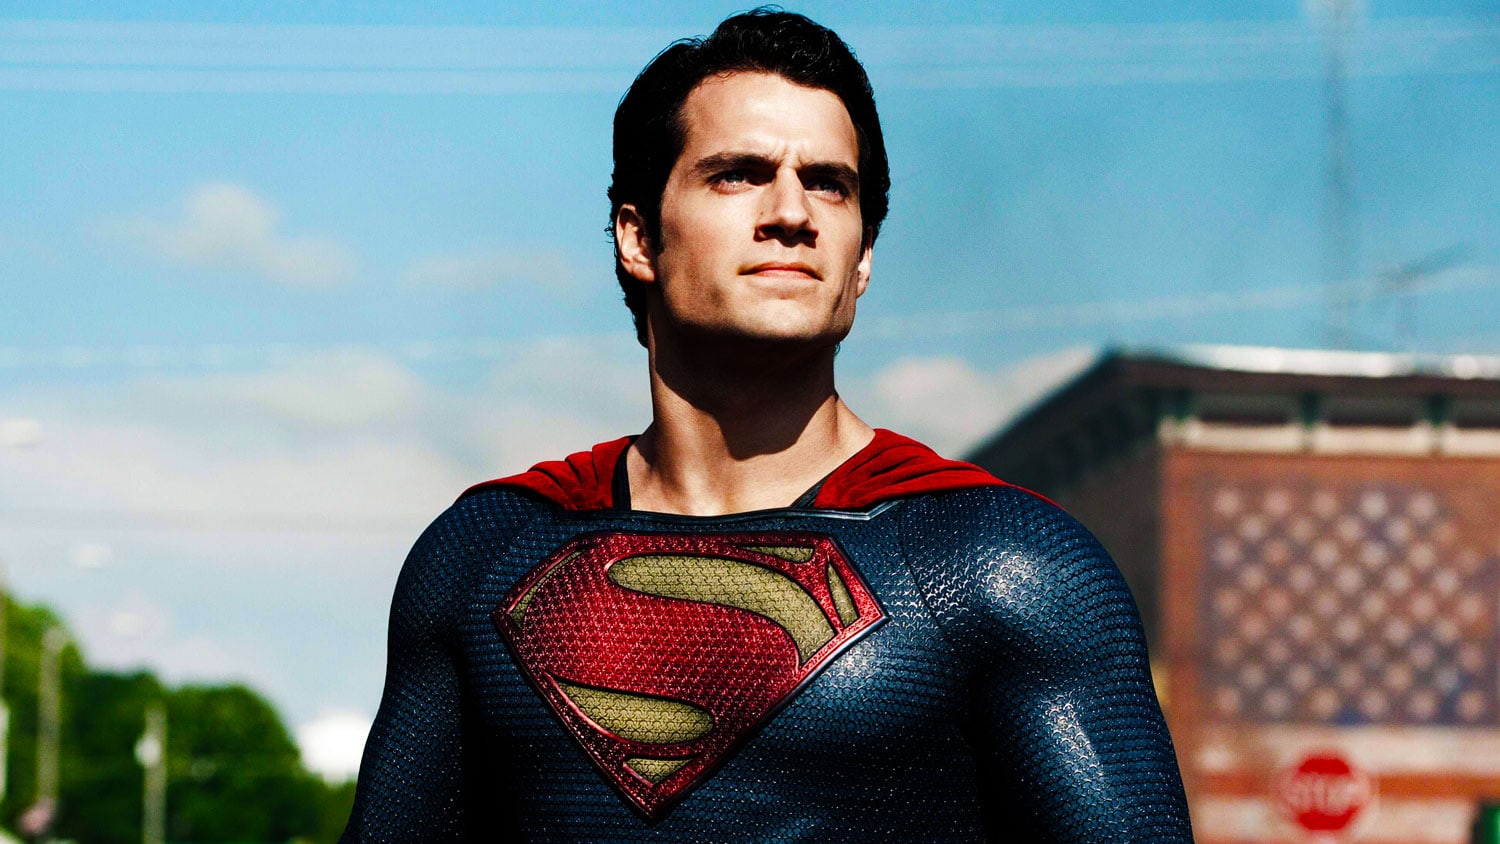 The Flash Supergirl star Sasha Calle got Henry Cavill's approval